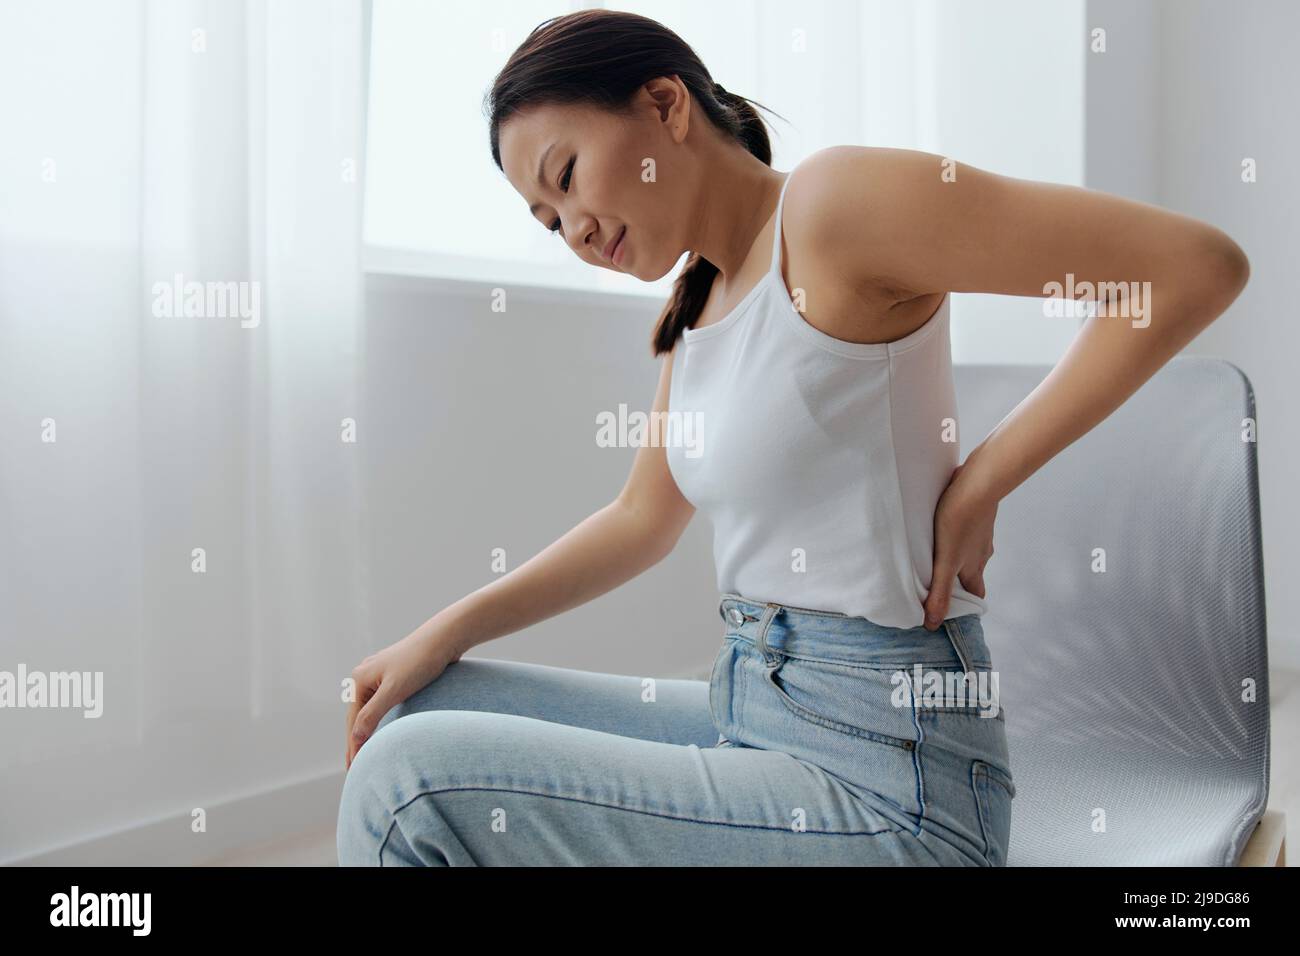 Suffering from scoliosis osteochondrosis after long study pretty young  Asian woman feel hurt joint back pain laptop in incorrect posture sit on  chair Stock Photo - Alamy